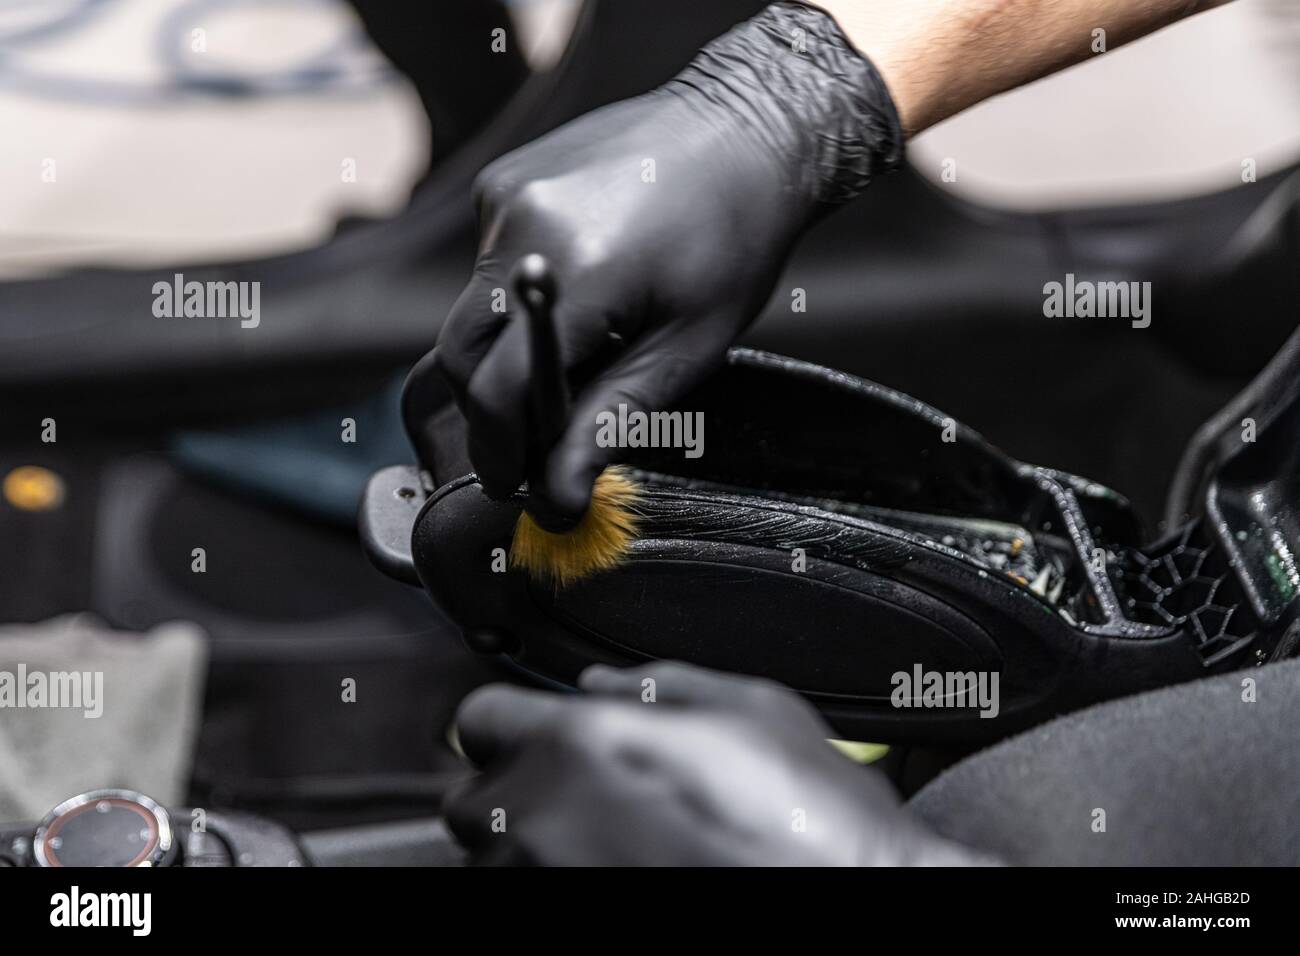 Car Wash Worker Cleaning Car Interior With Brush Stock Photo